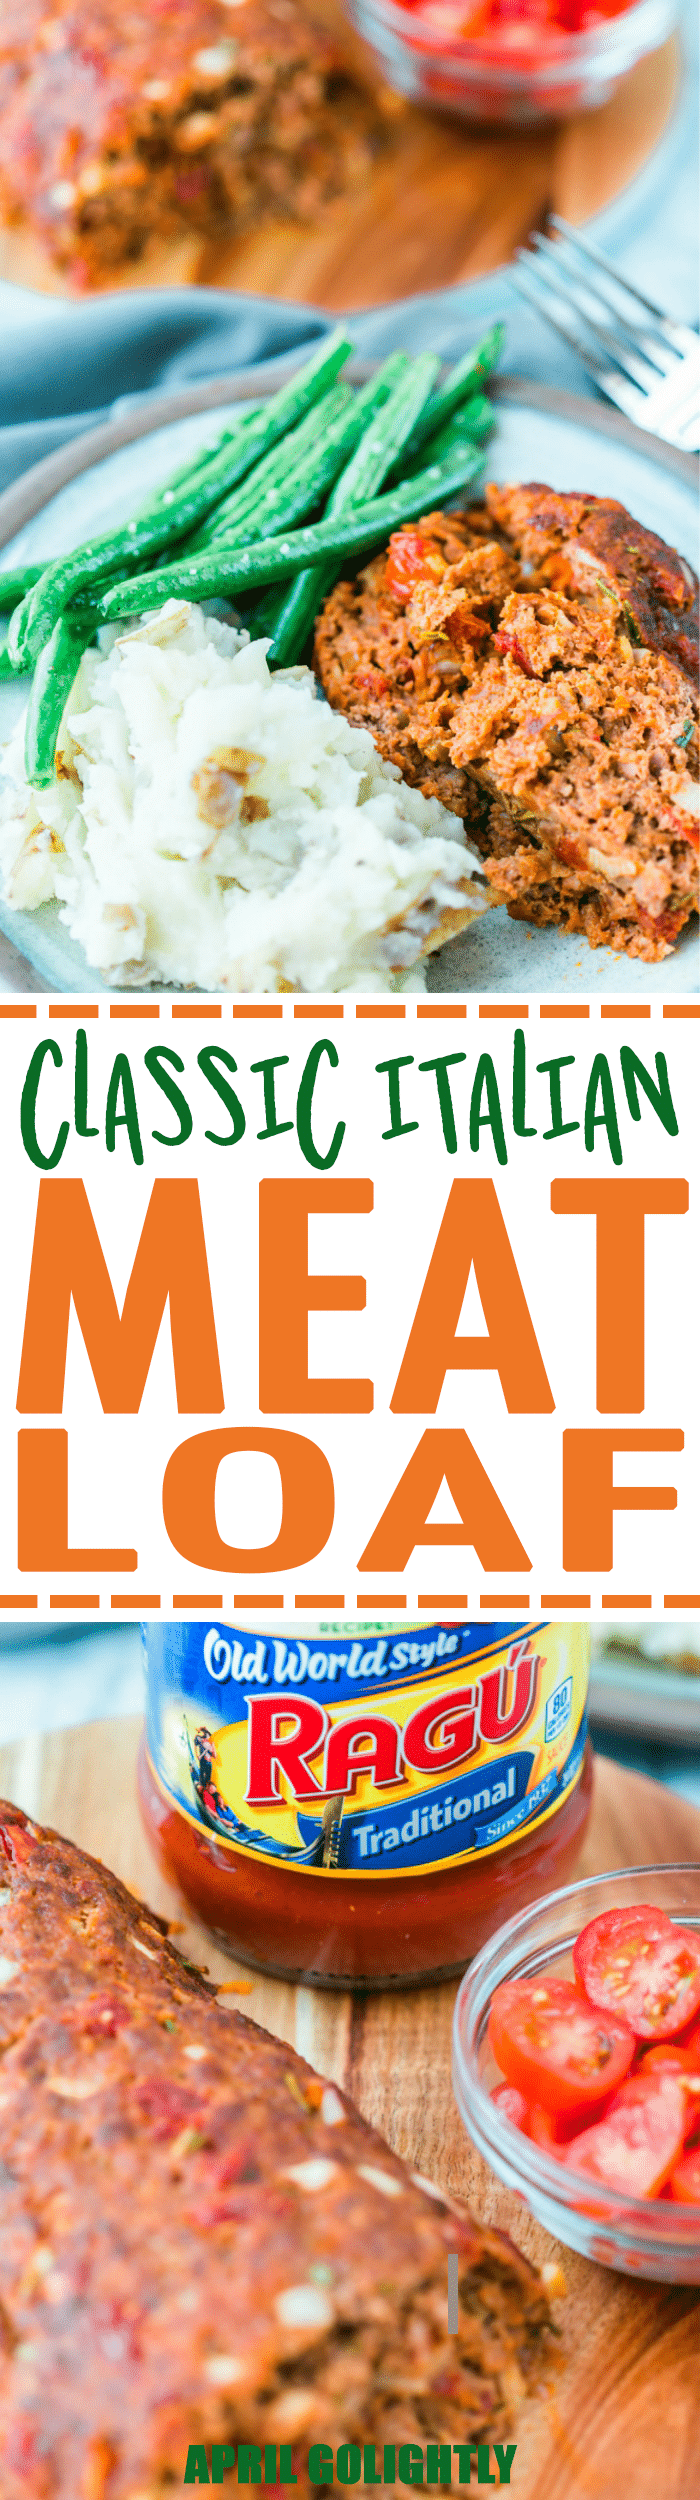 Easy Italian Meatloaf Recipe made with ground beef, potato sauce, bread, rosemary, shallots, garlic, with a side of mashed potatoes & green beans